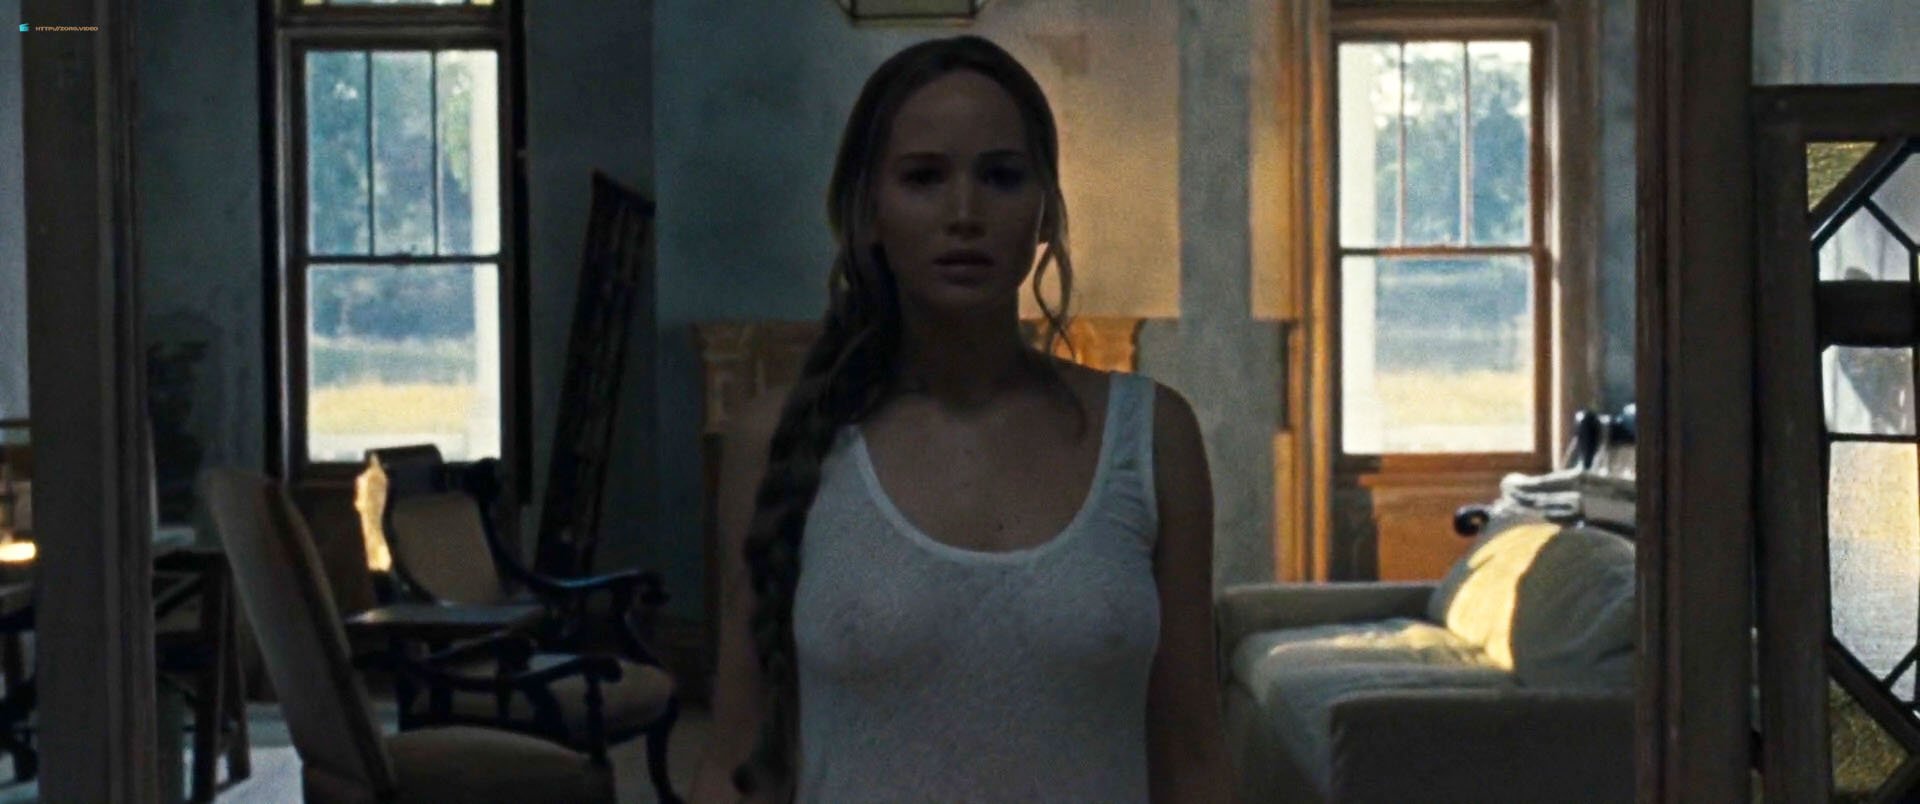 Is jennifer lawrence nude in mother